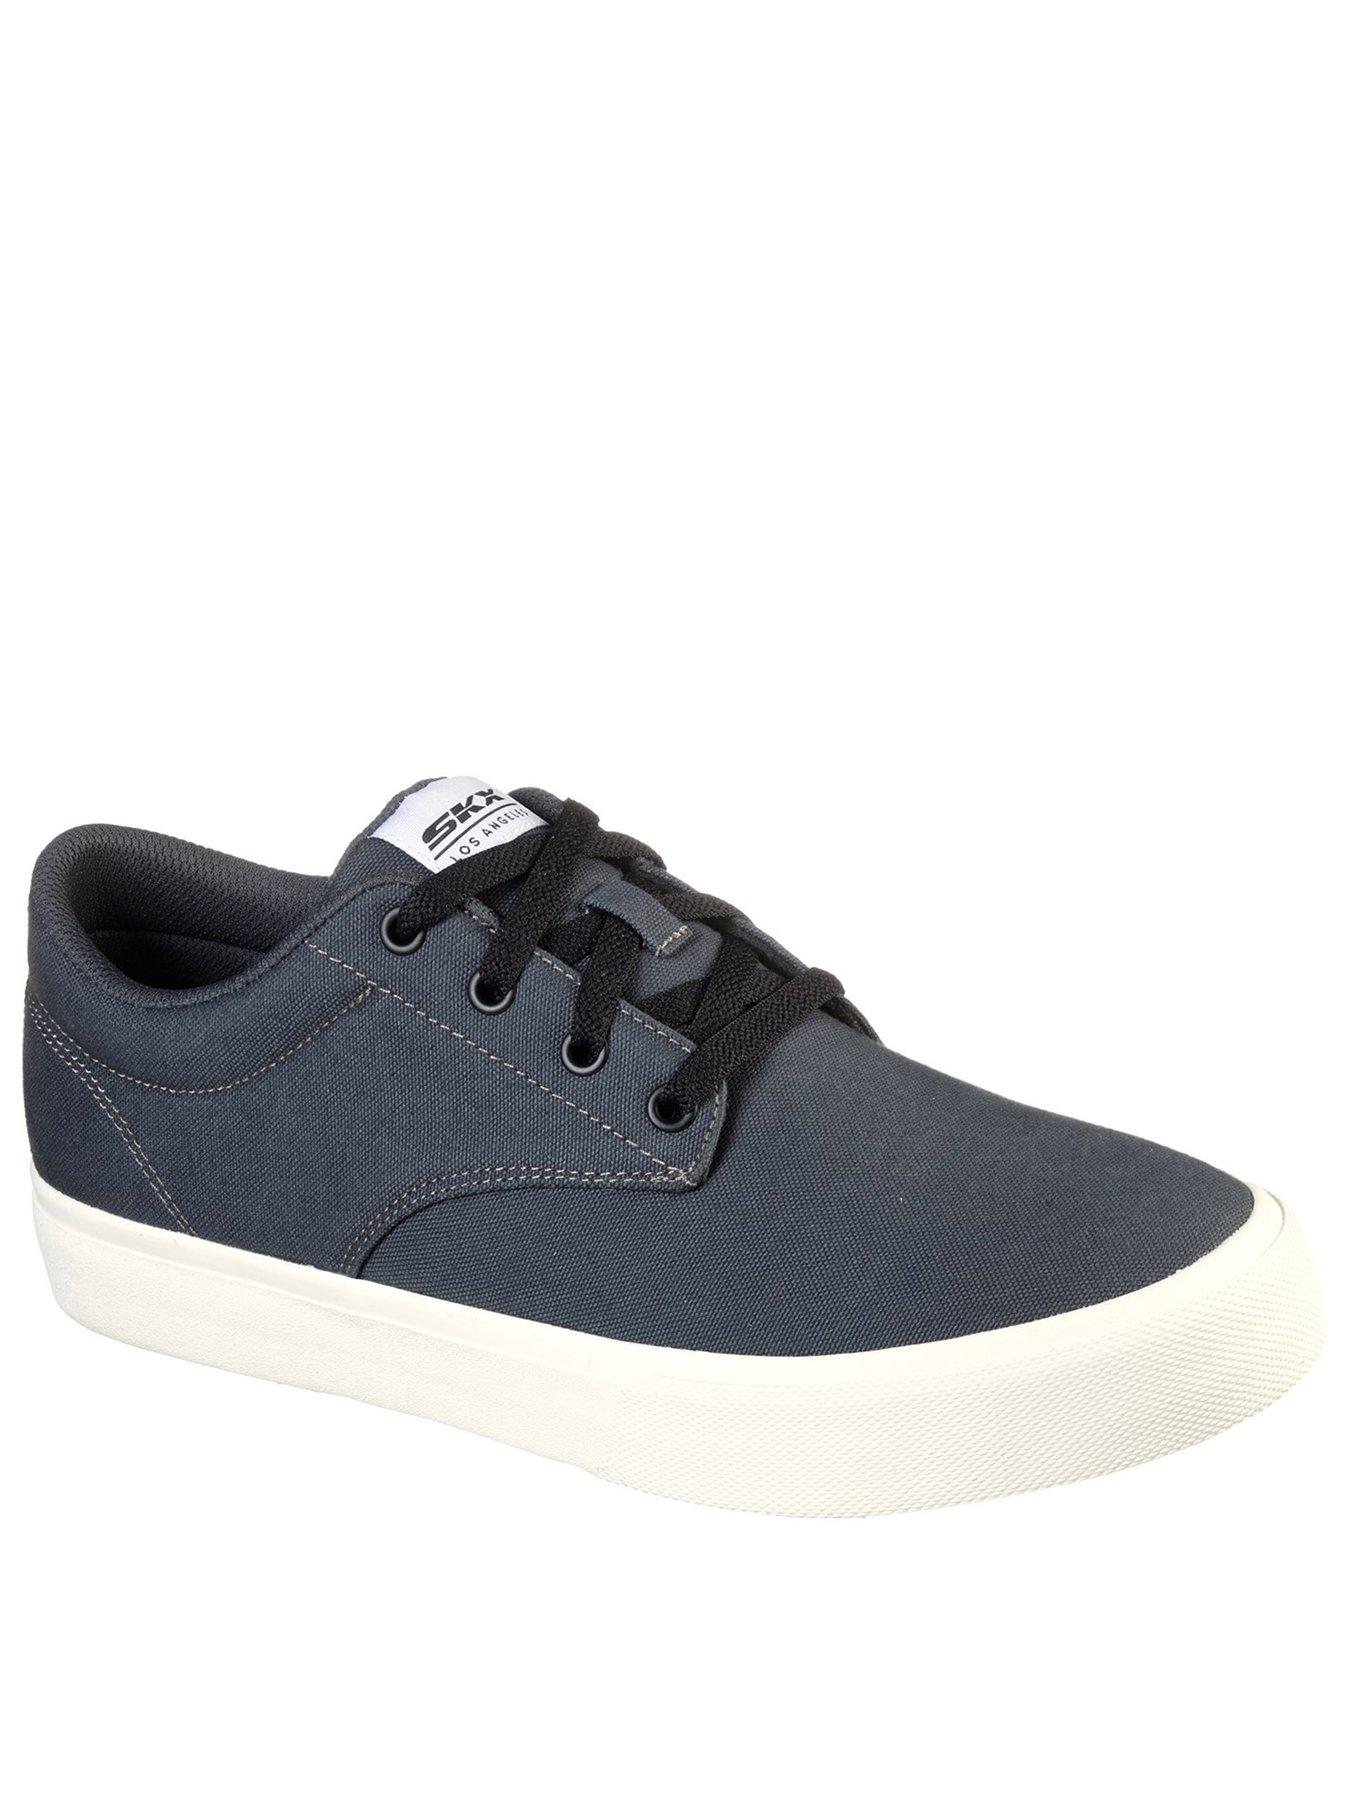 Skechers Canvas Lace-Up Vulcanized Sneaker W/ Air-Cooled Memory Foam ...